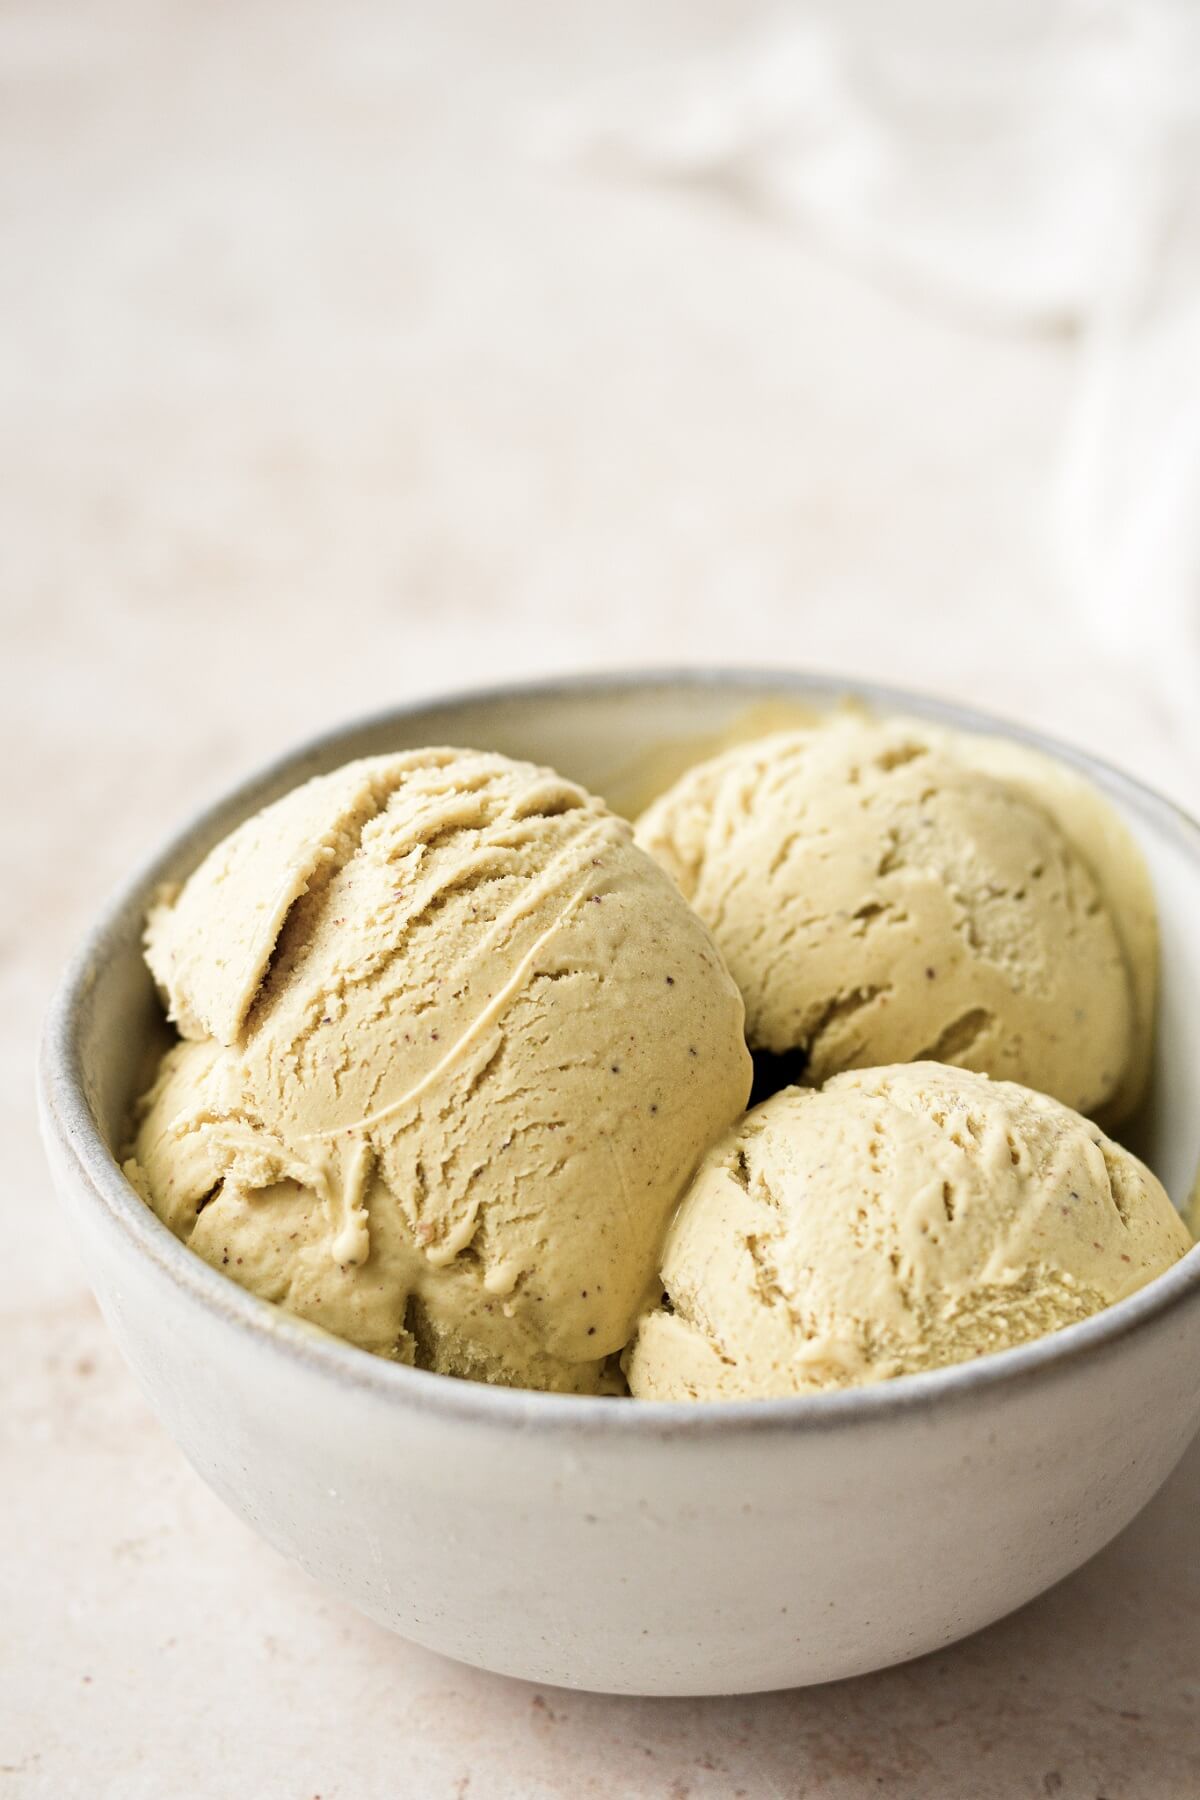 Scoops of no churn pistachio ice cream in a bowl.